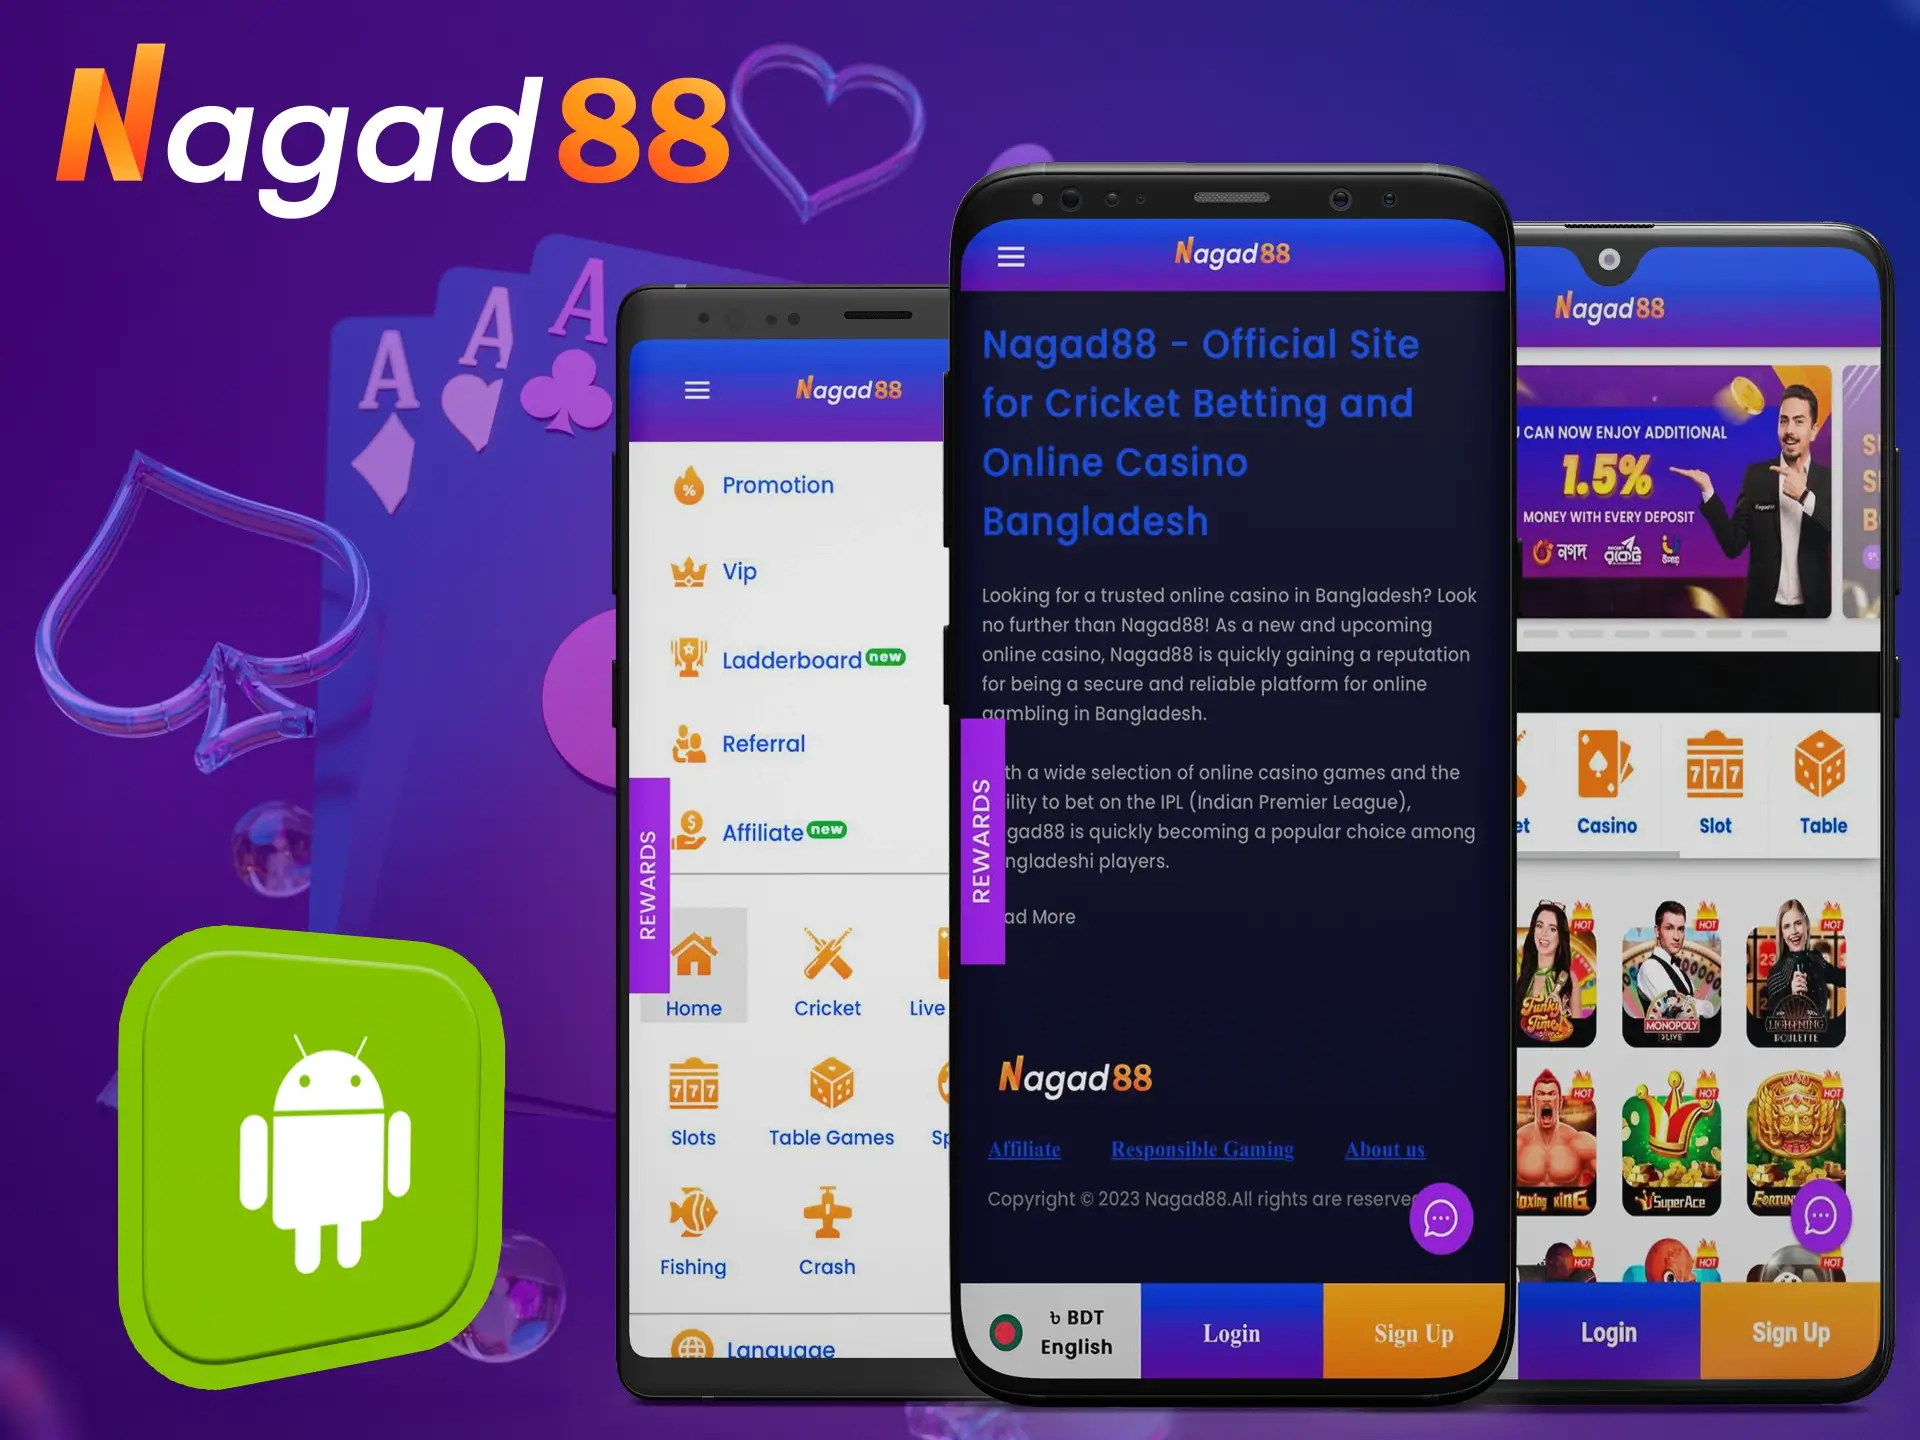 Use a variety of Android devices to play at Nagad88 Casino.